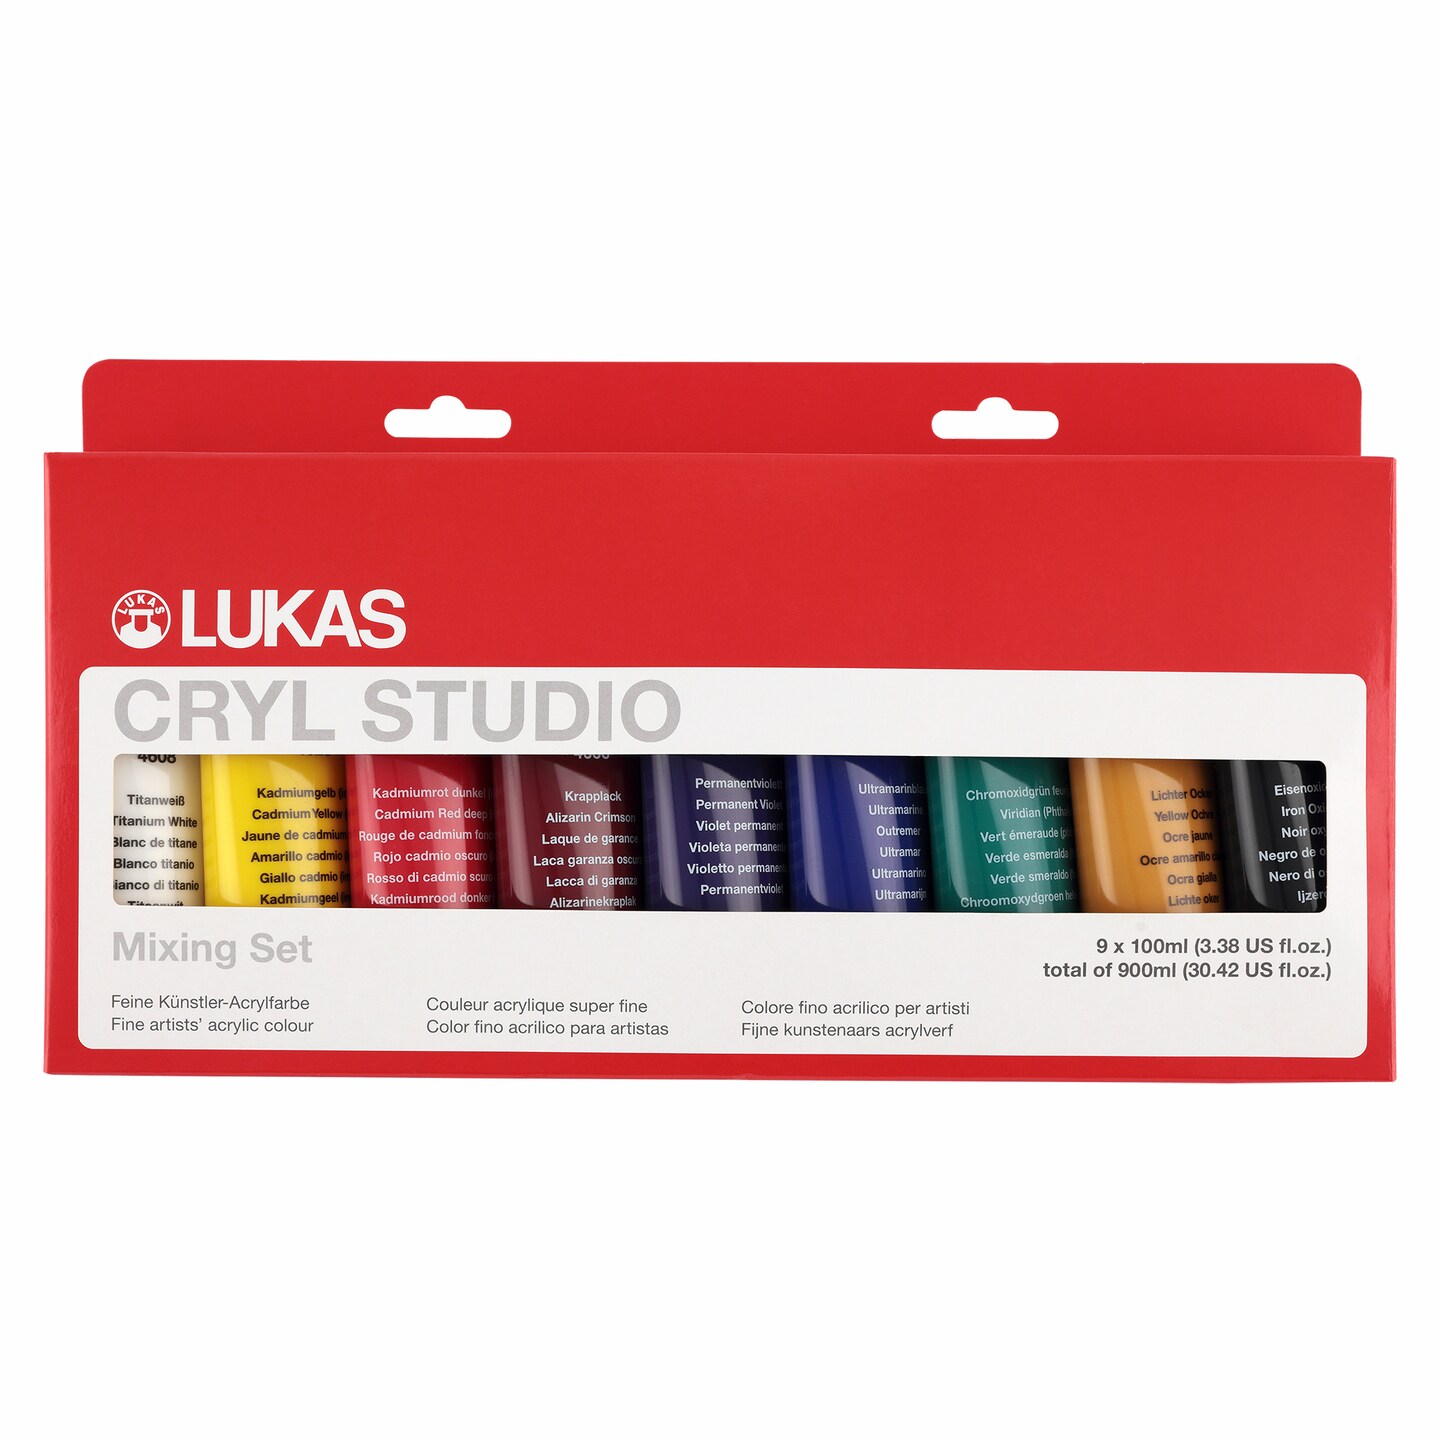 Lukas CRYL Studio Artist Acrylic Paint - Fast Drying Medium-Viscosity  Acrylic Paint for Canvas, Artists, Projects, & More!